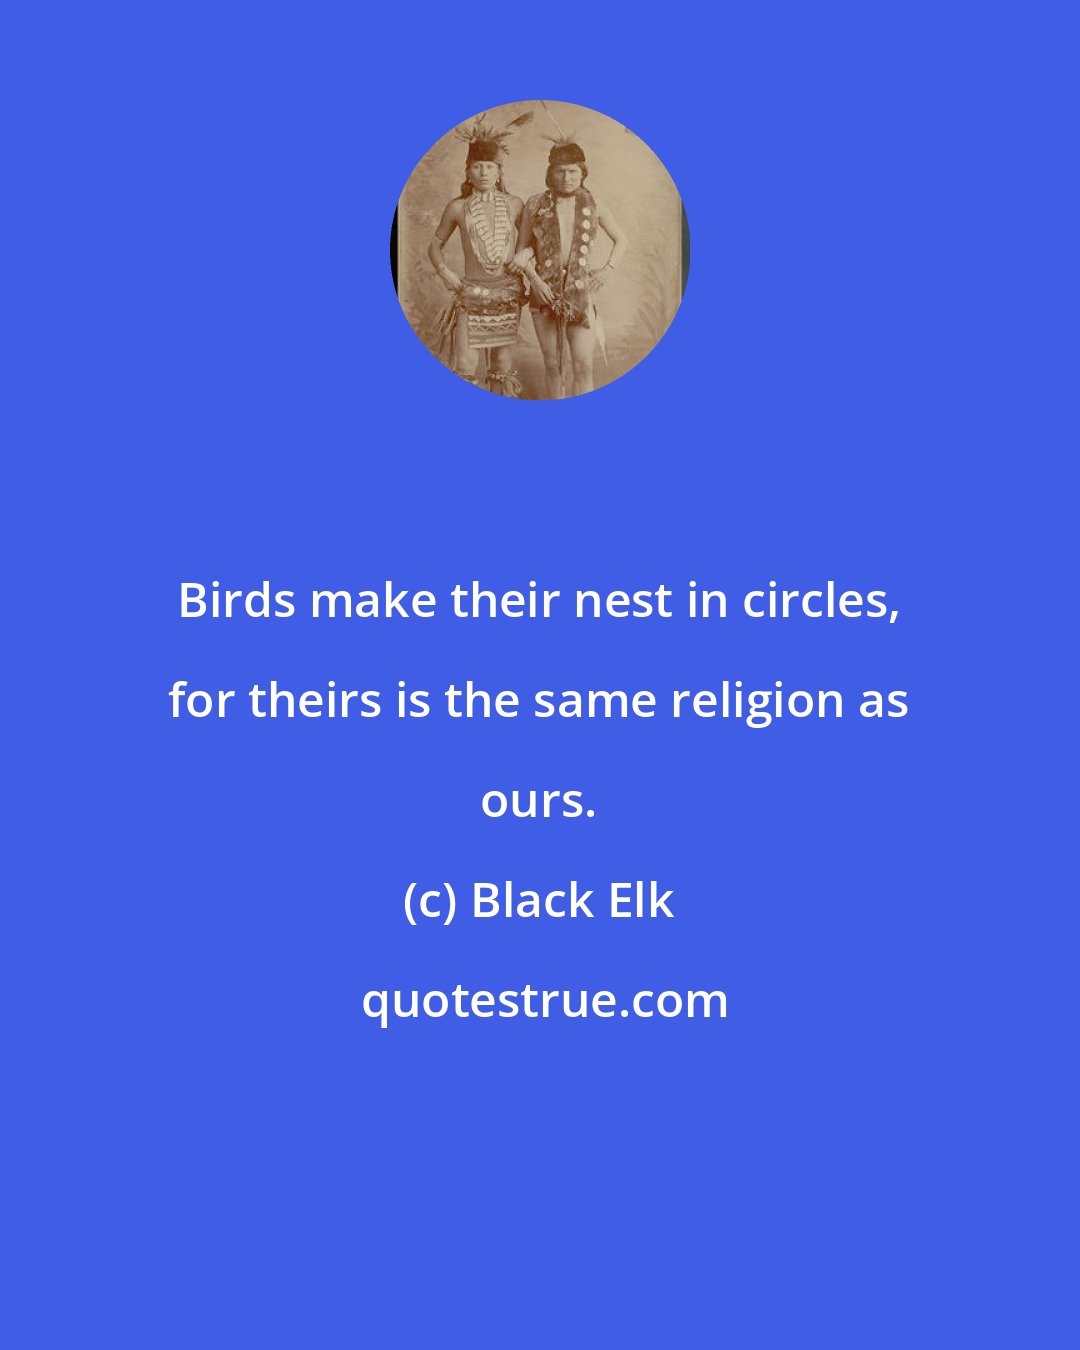 Black Elk: Birds make their nest in circles, for theirs is the same religion as ours.